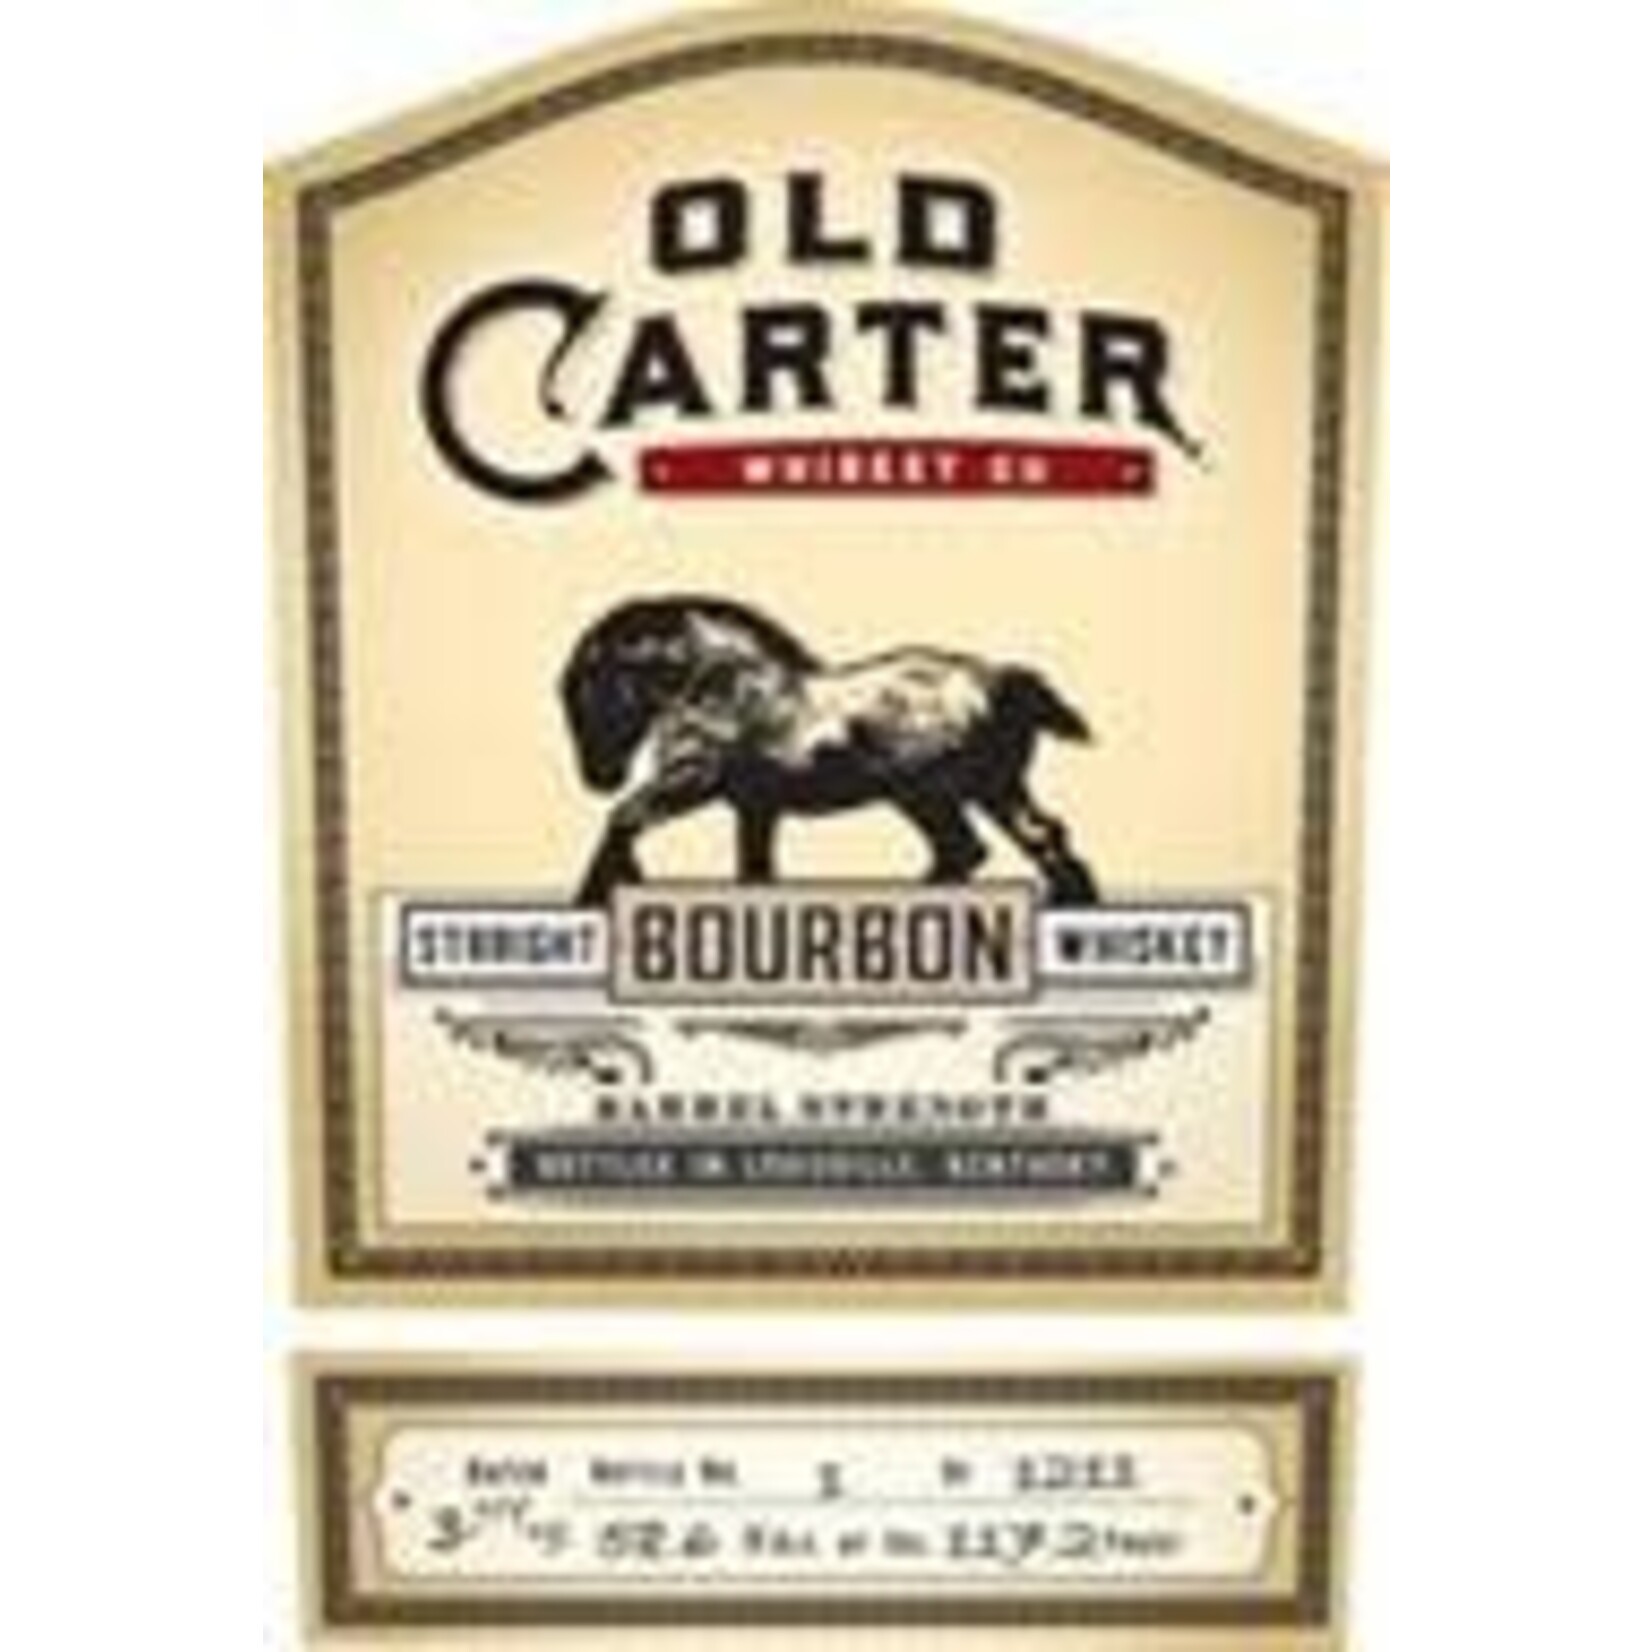 Spirits Old Carter Straight Bourbon Barrel Strength Very Small Barch #3